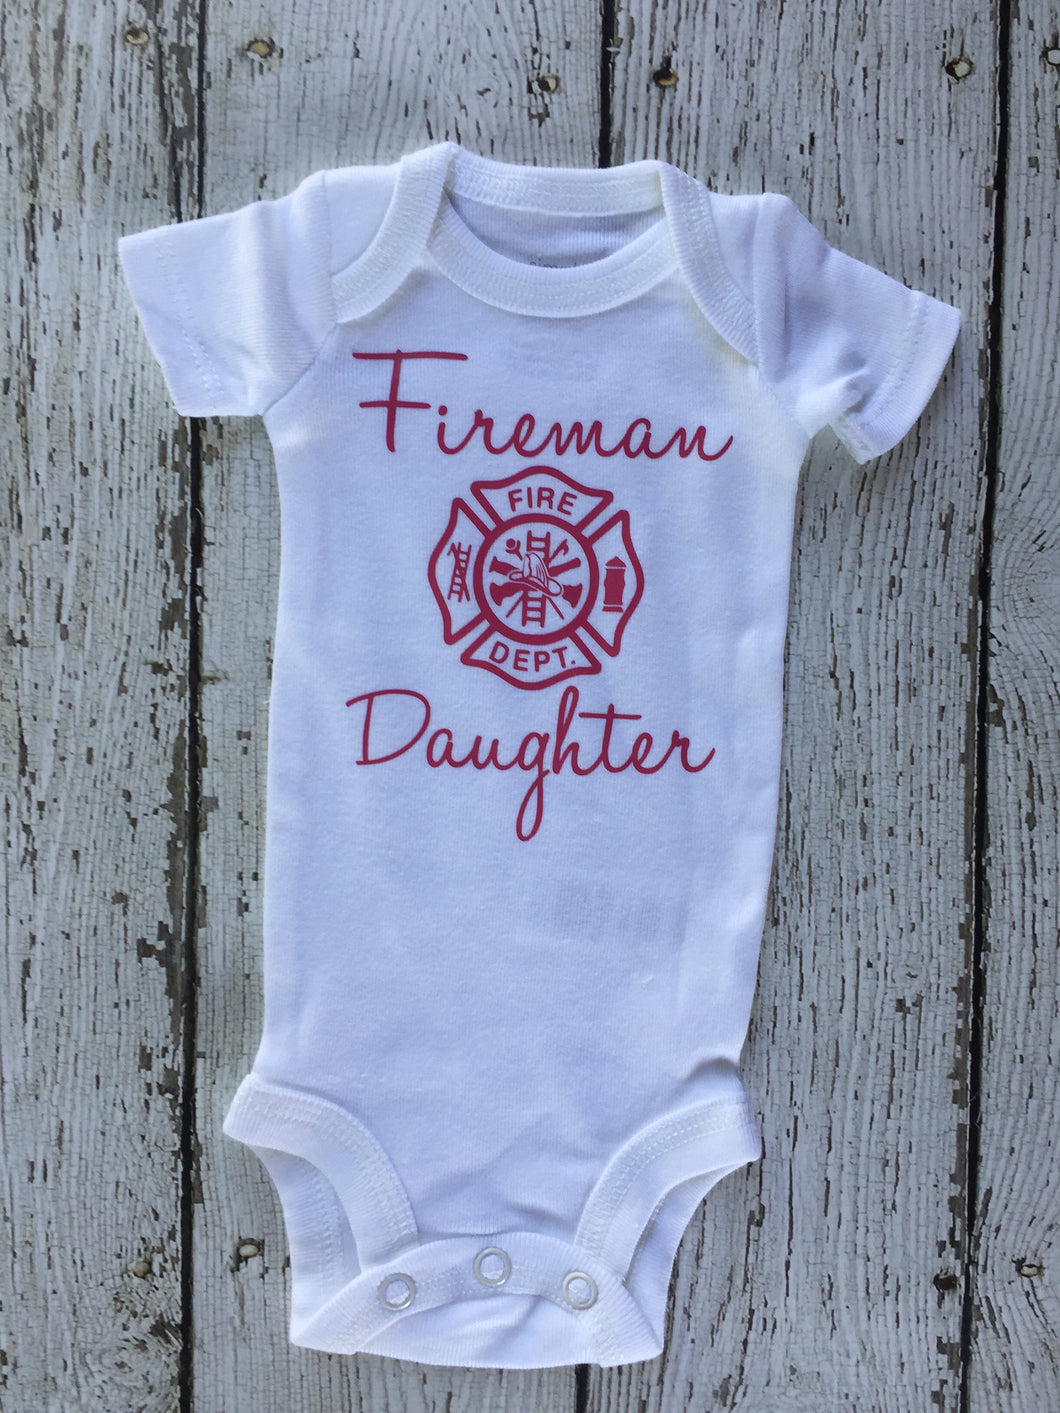 Firemans Daughter Baby Outfit, Baby Outfit Firemans Daughter, Firemans Daughter Outfit Baby, Firemans Daughter Baby Gift, Baby Shower Gift